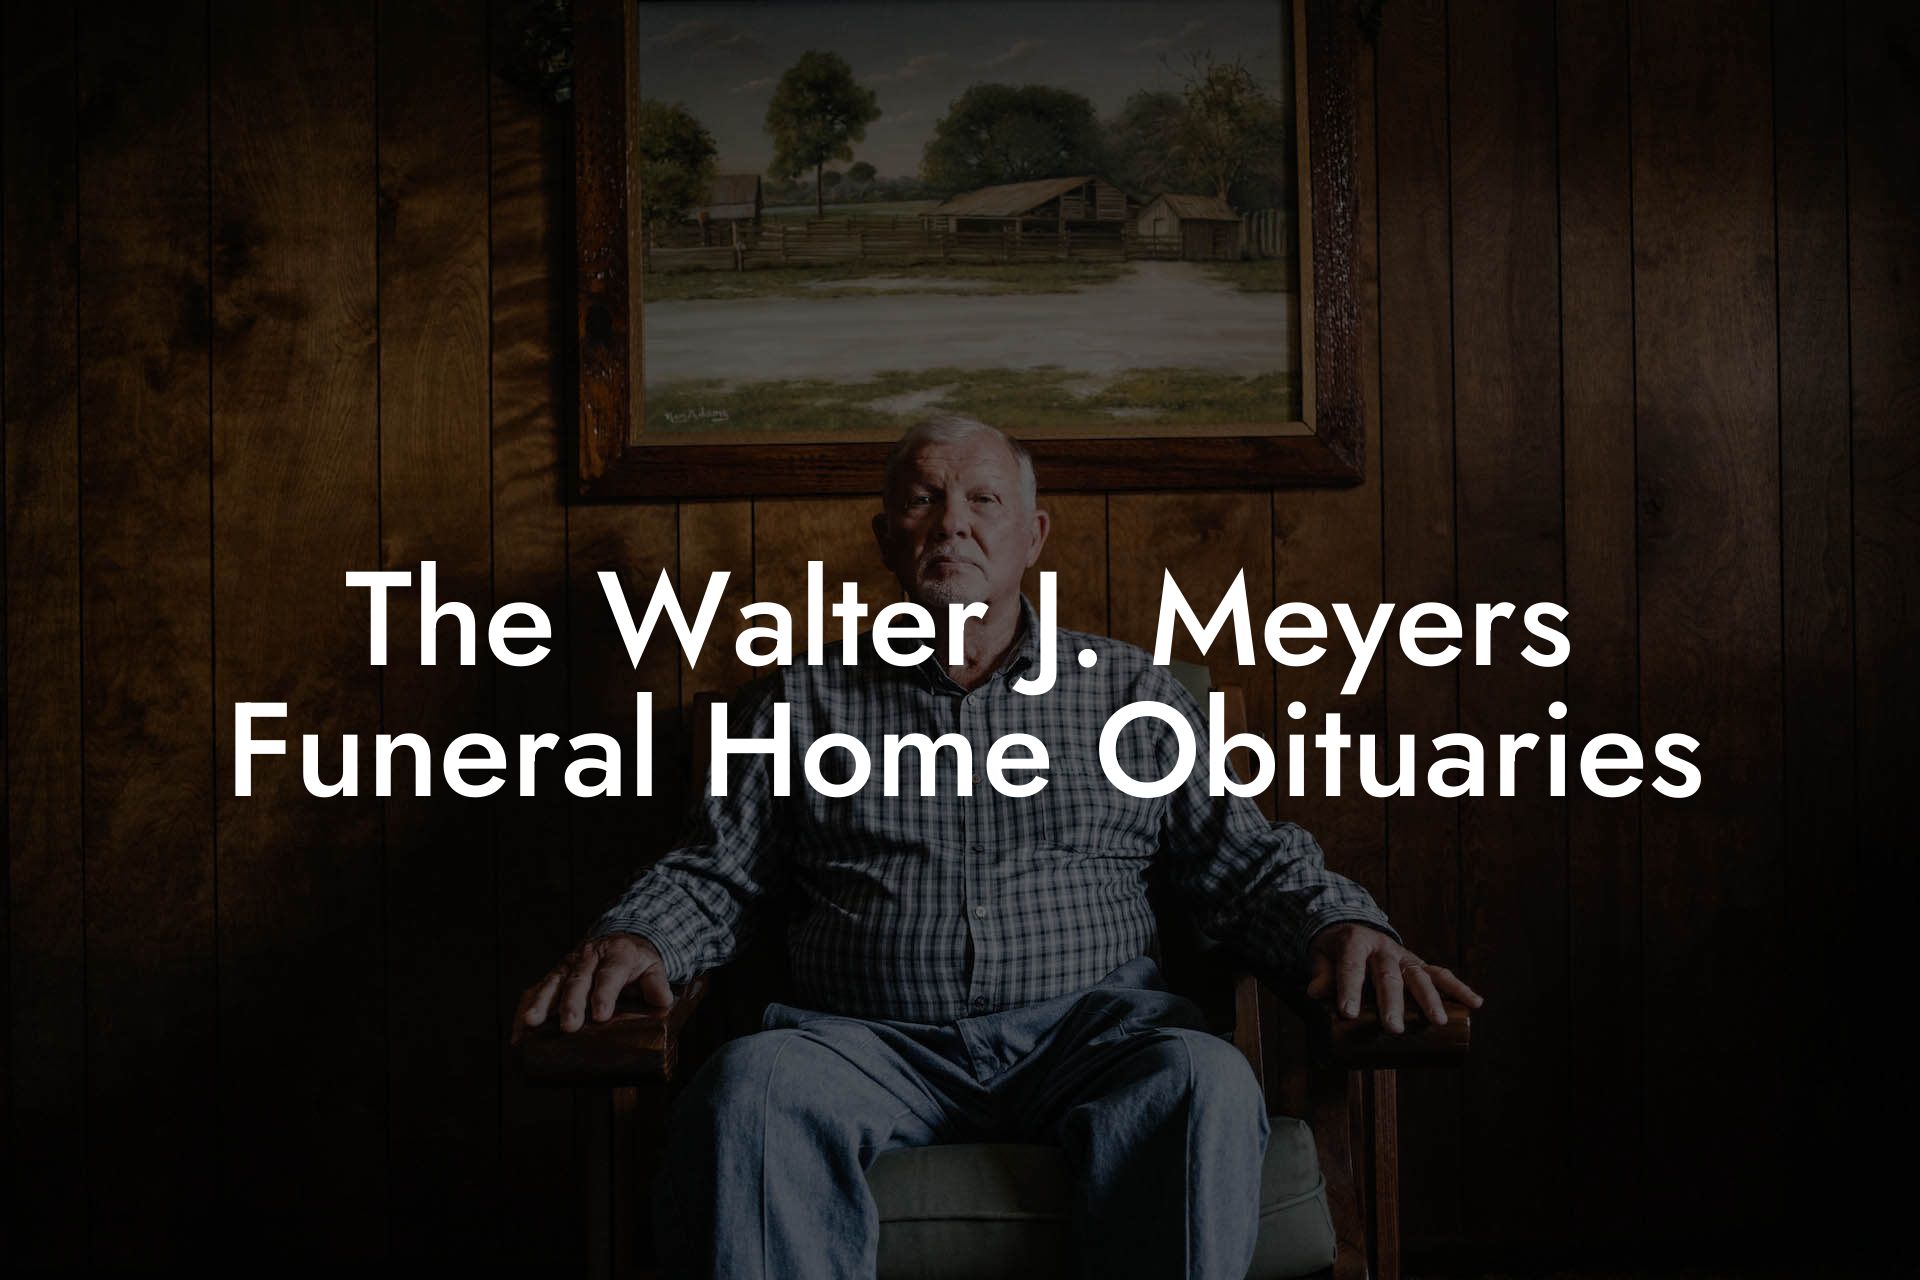 The Walter J. Meyers Funeral Home Obituaries